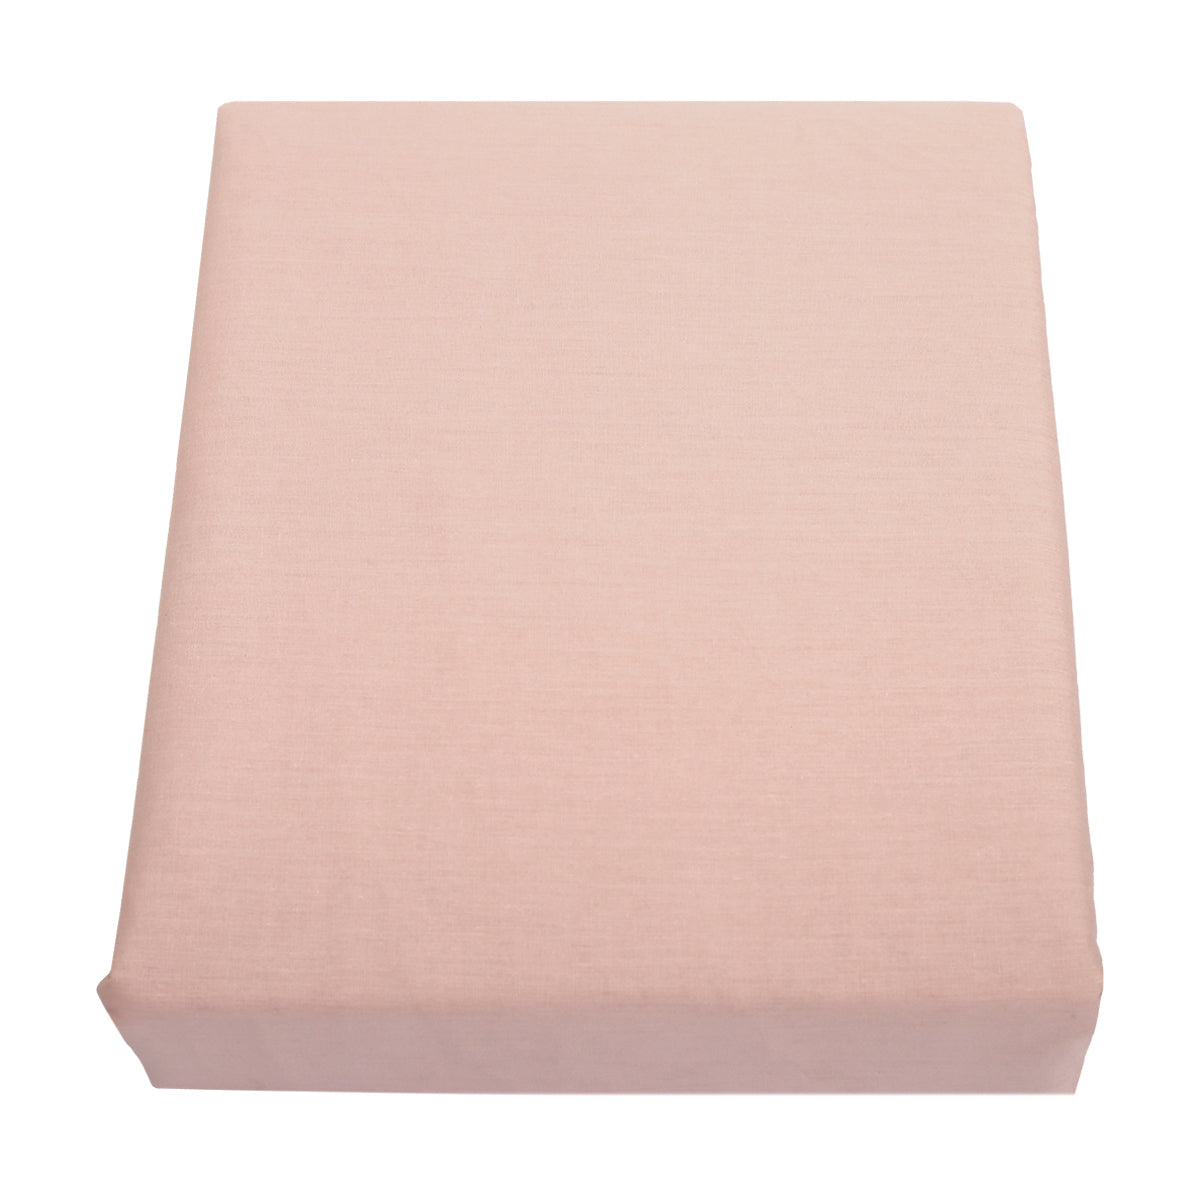 Powder Pink Double Bedding Set of 6